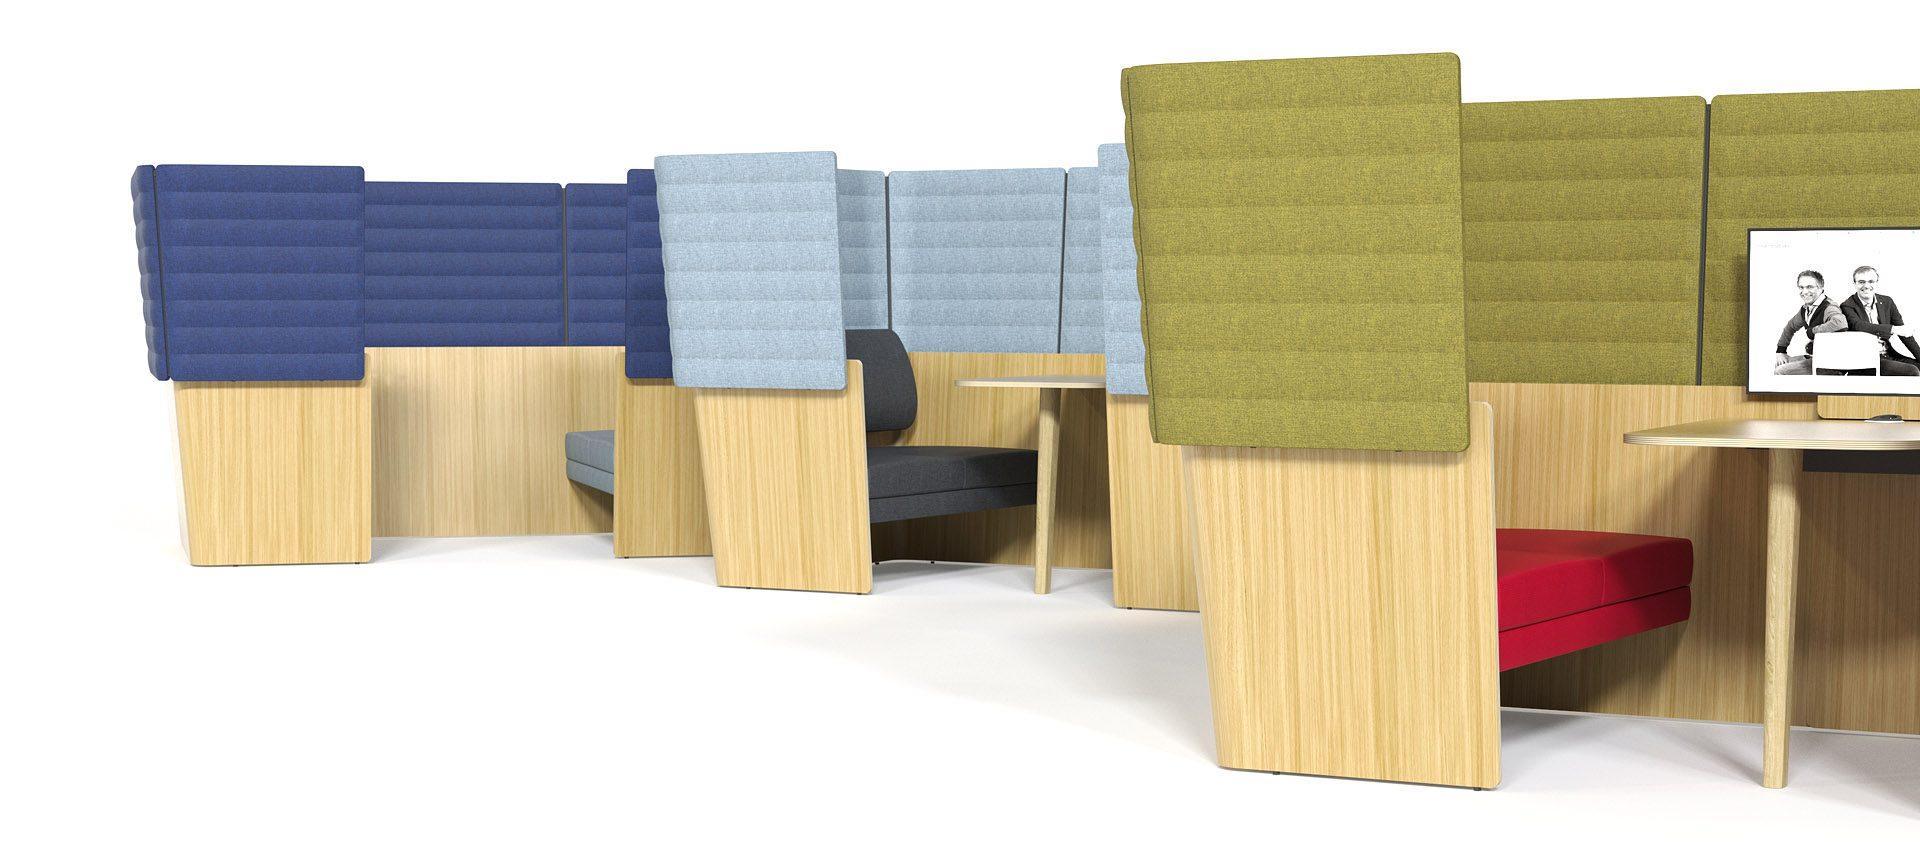 Arcipelago Wood meeting booths are ideal for brief tasks or longer work sessions, meetings or relaxation